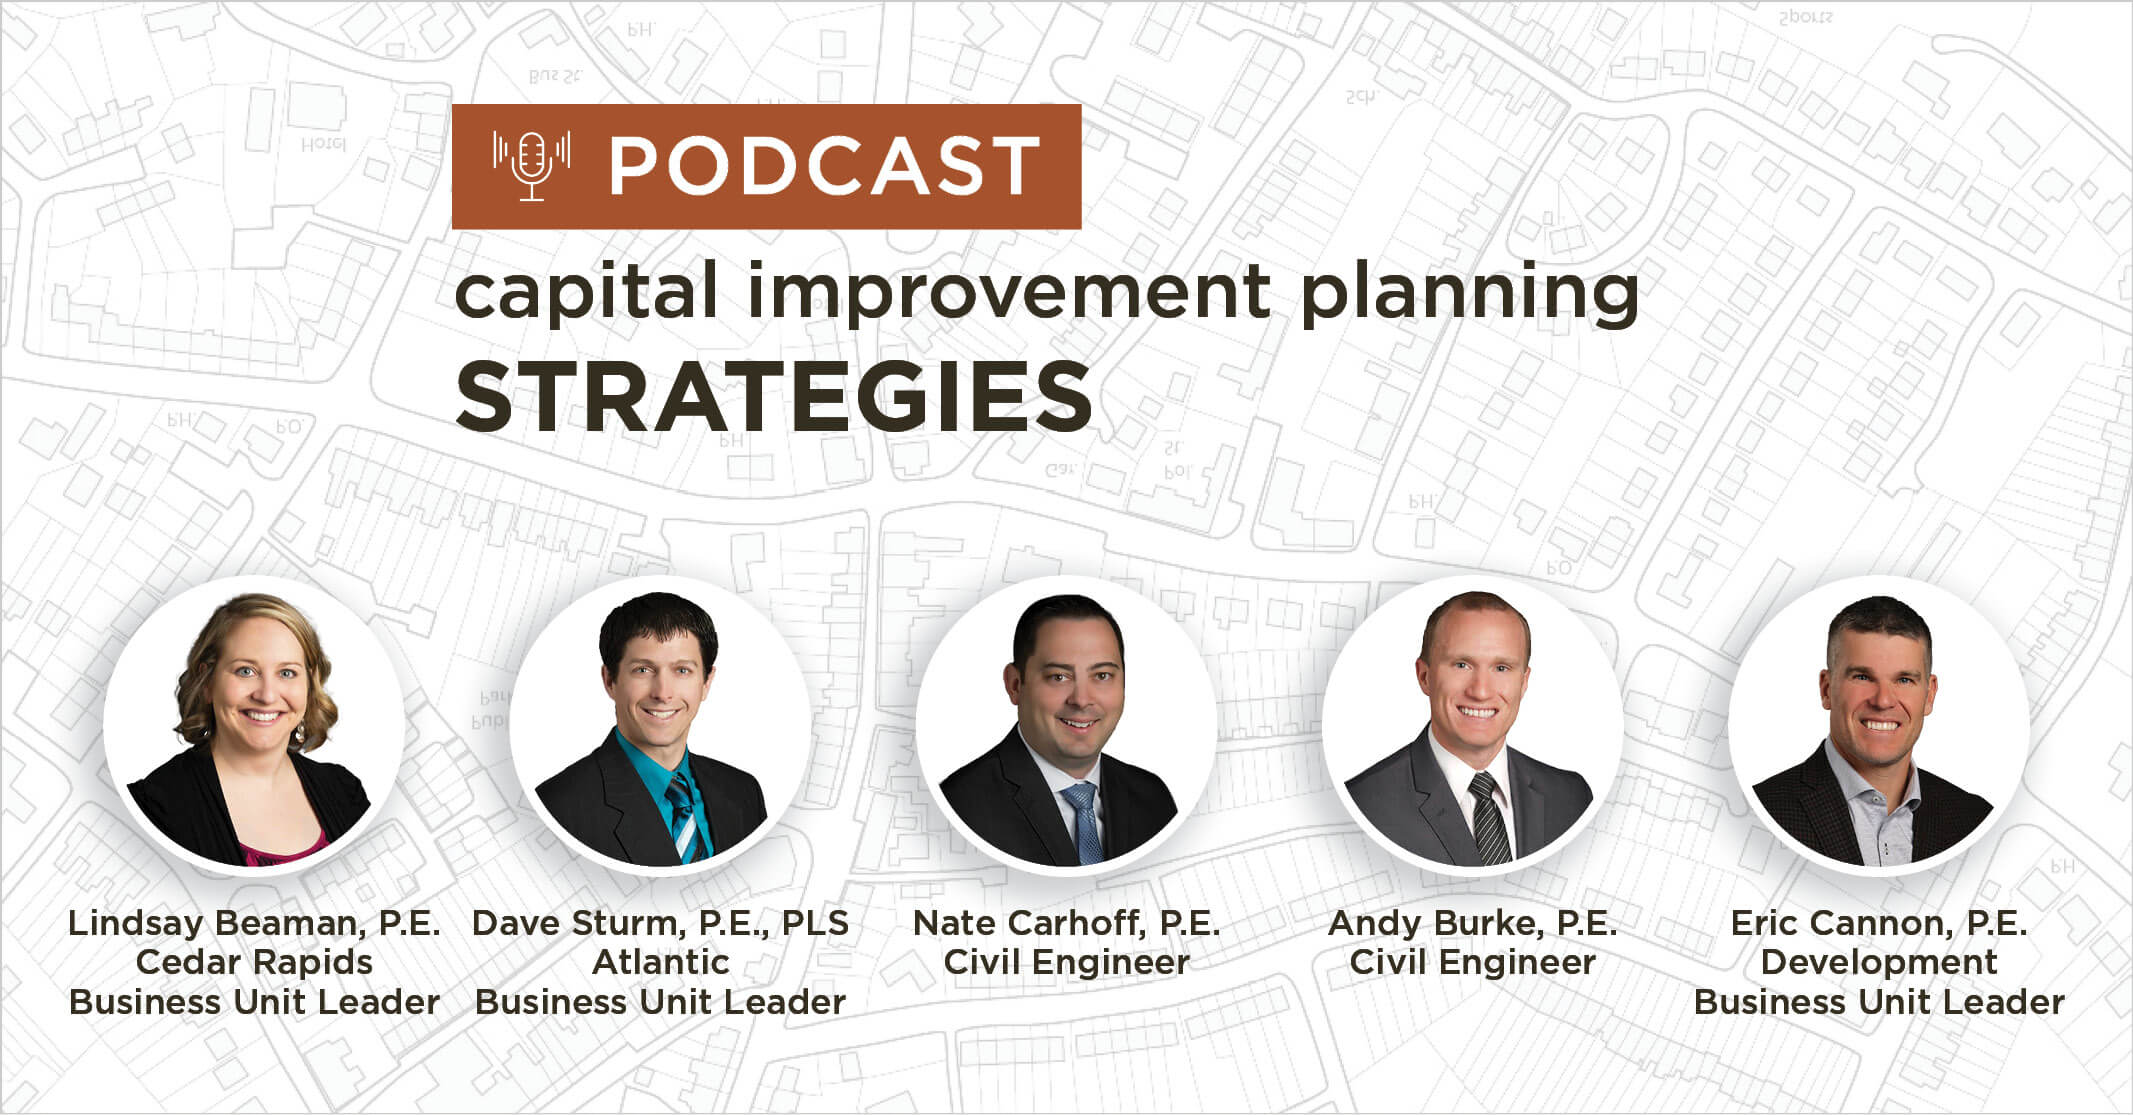 Capital Improvement Planning Strategies Podcast featuring Lindsay Beaman, Dave Sturm, Nate Carhoff, Andy Burke and Eric Cannon